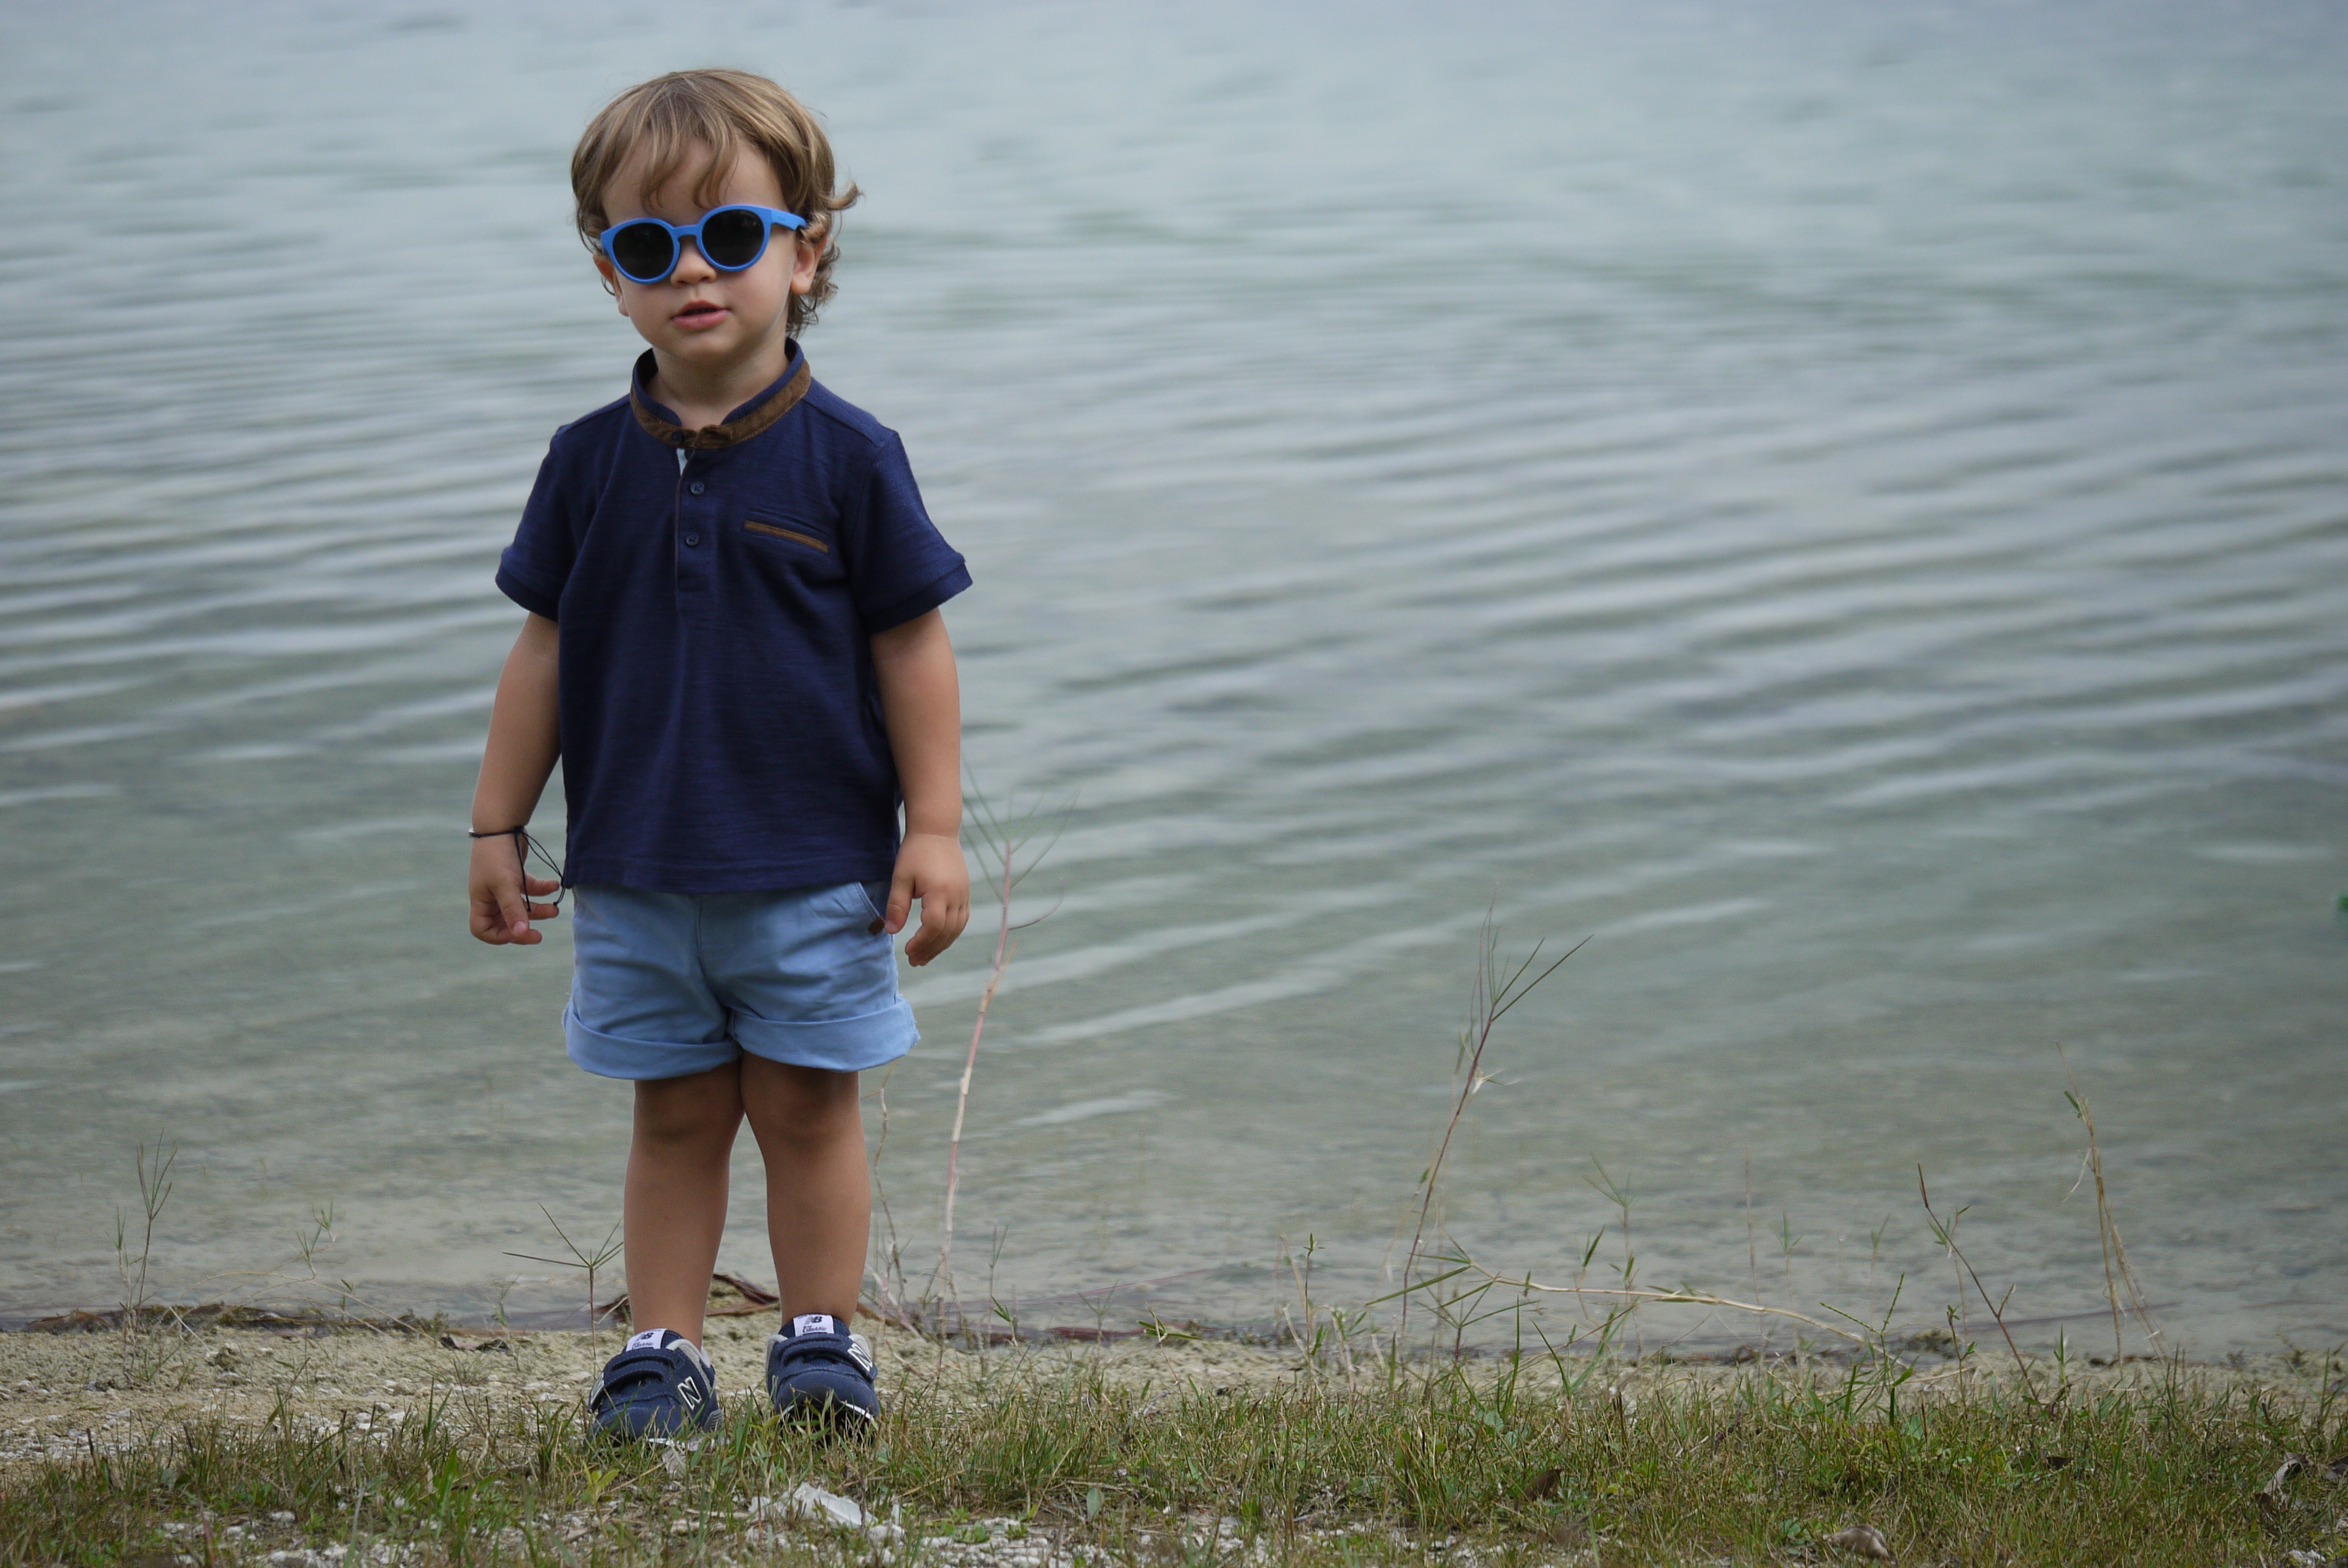 Alba Marina Otero fashion blogger from Mylovelypeople blog shares with you some pics of her son. He is wearing a blue shorts with blue t-shirt and new balance sneakers.